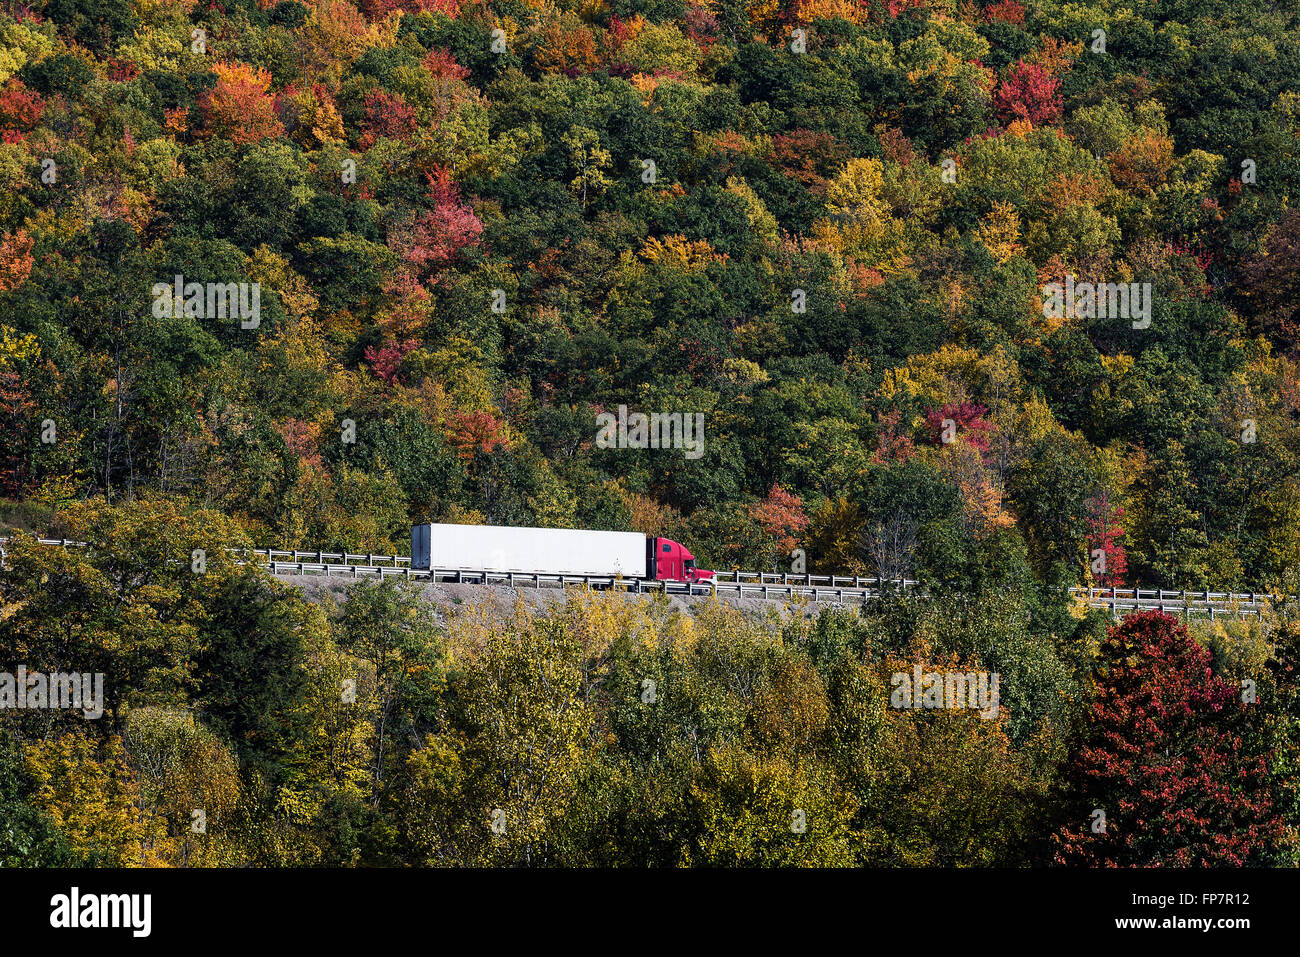 Truck on the road enroute to delivery, Covington, Pennsylvania, USA Stock Photo